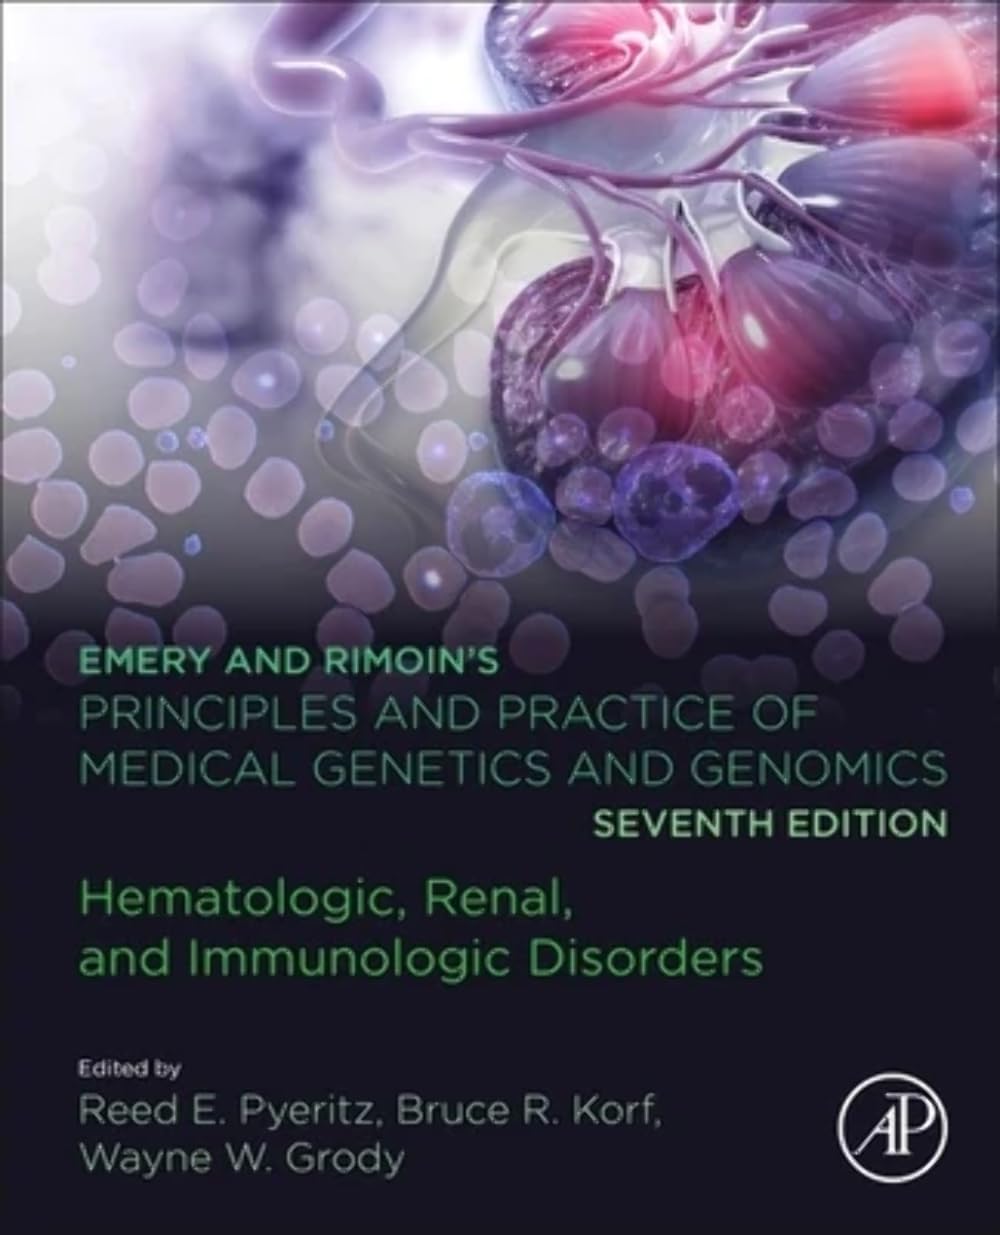 Emery and Rimoin s Principles and Practice of Medical Genetics and Genomics: Hematologic, Renal, and Immunologic Disorders, 7th Edition by Reed E. Pyeritz 